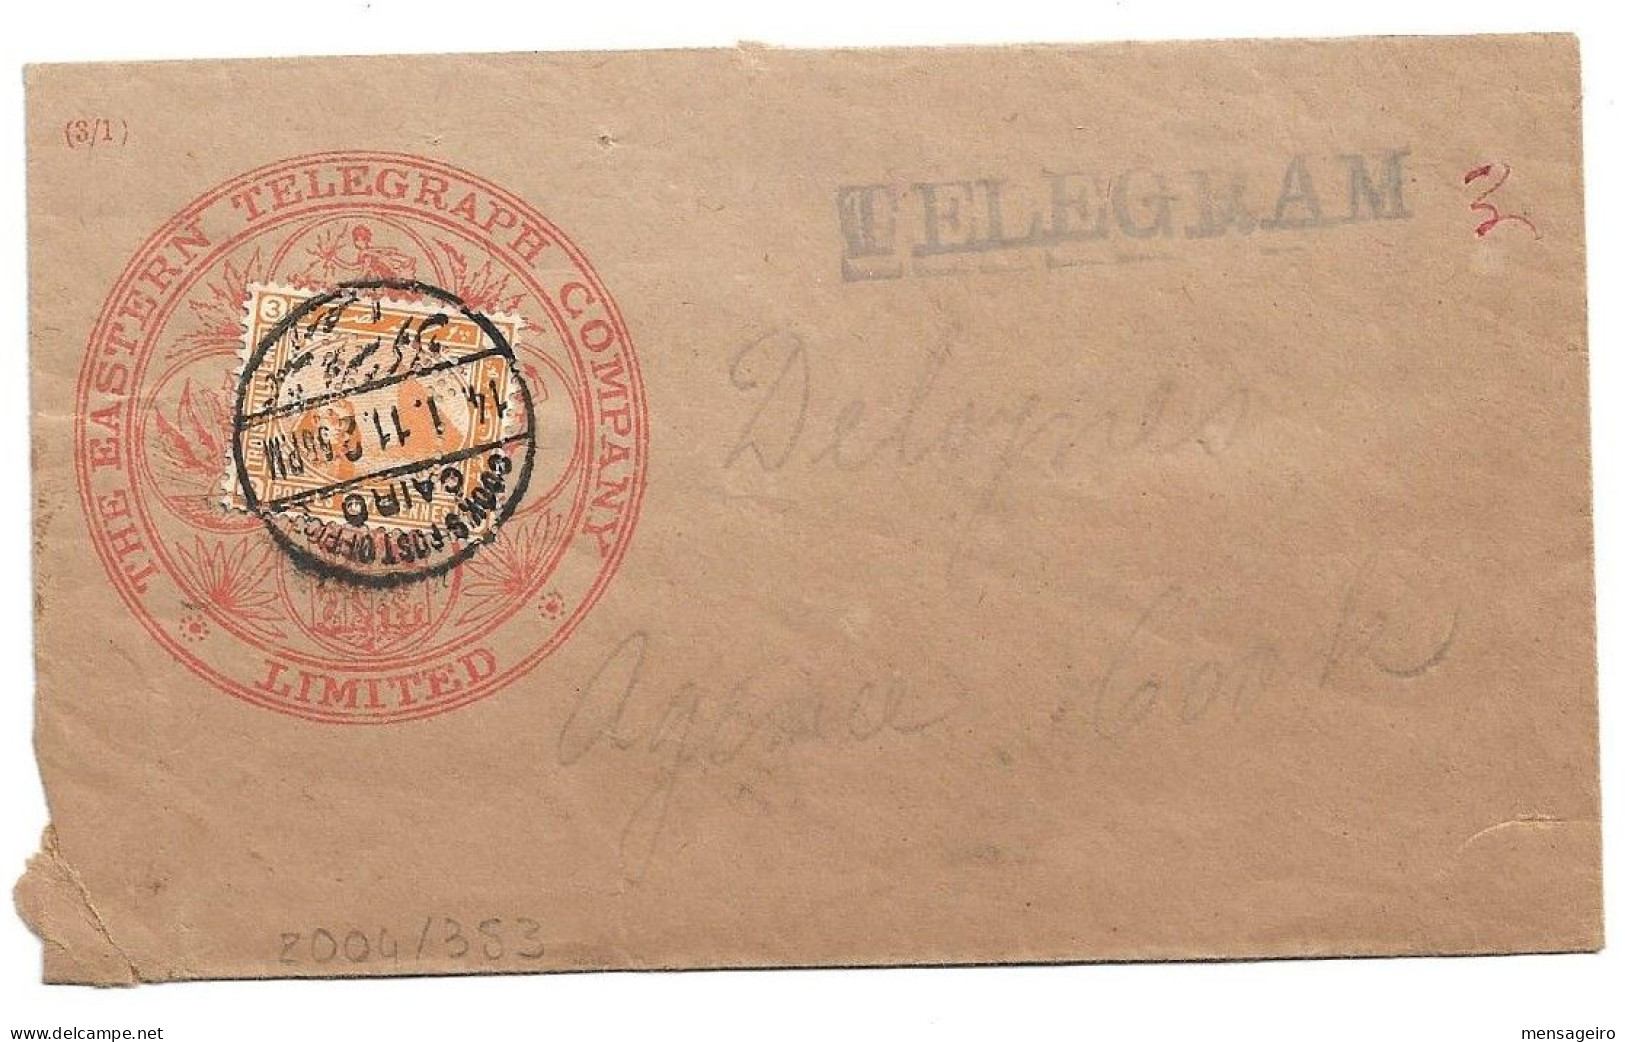 (C04) EASTERN TELEGRAM COVER WITH 3M. STAMP PERFIN "T C/ & S" (INVERTED) - COOKS POST OFFICE / CAIRO => COOK AGENCY - 1866-1914 Khedivate Of Egypt